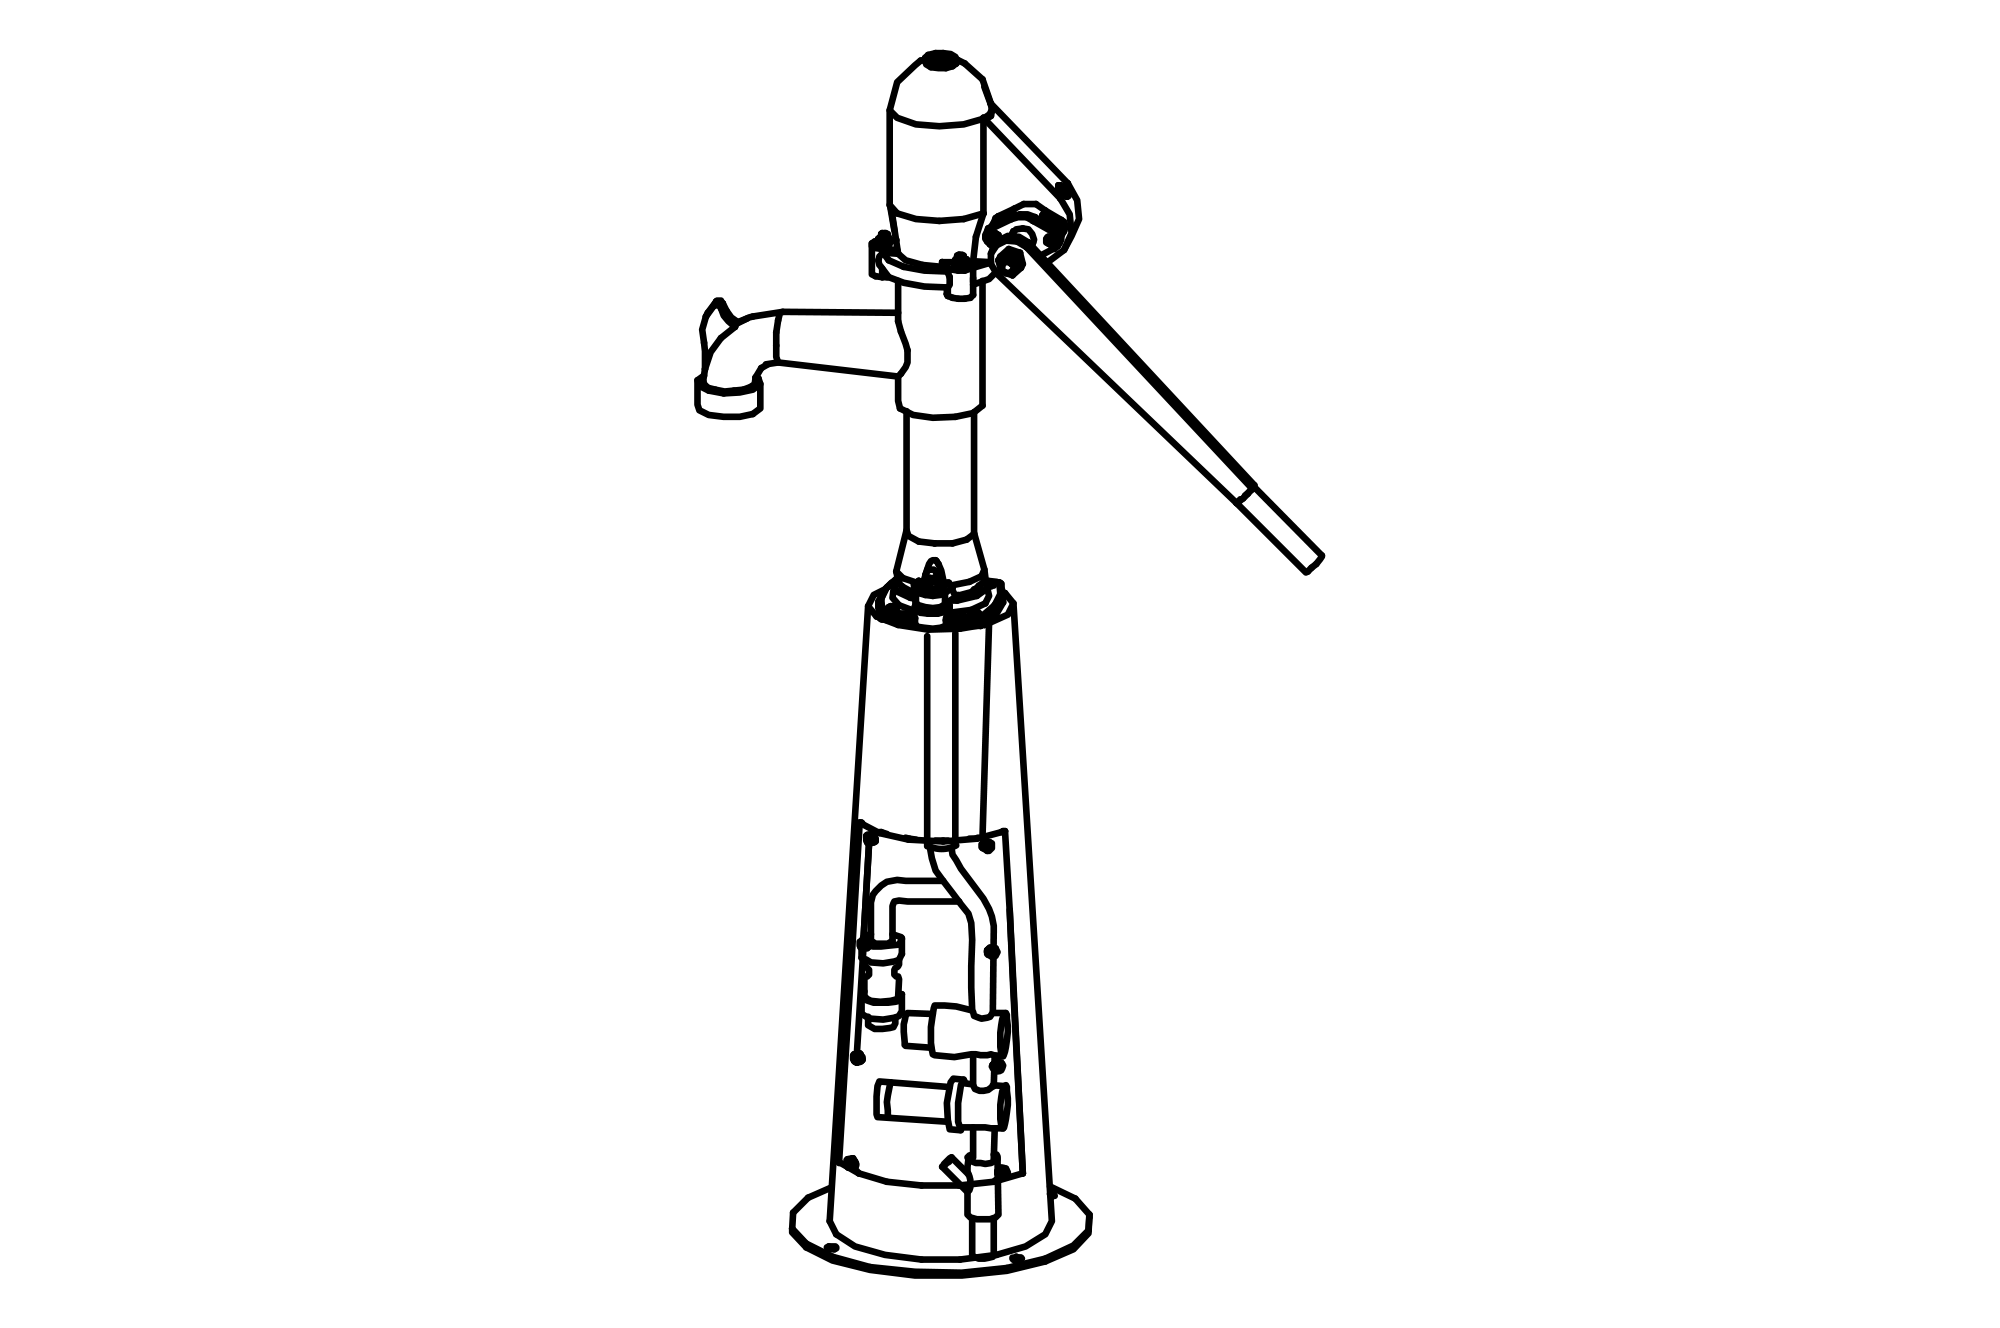 Playground Pump with rinsing device